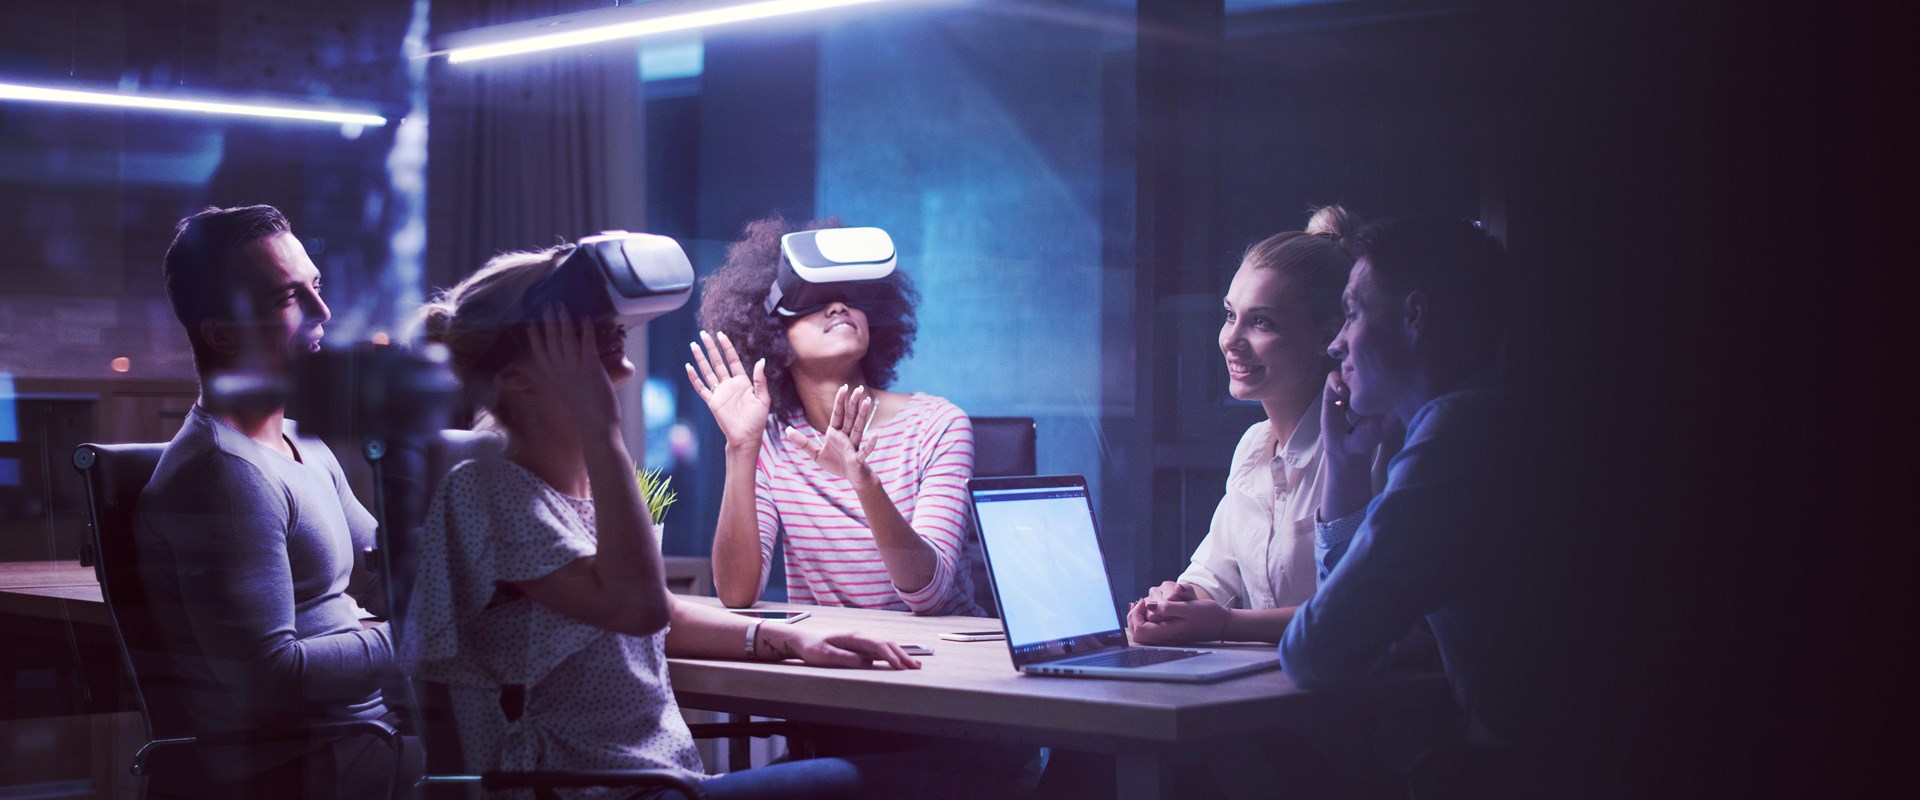 A group of people in a meeting using virtual reality headsets